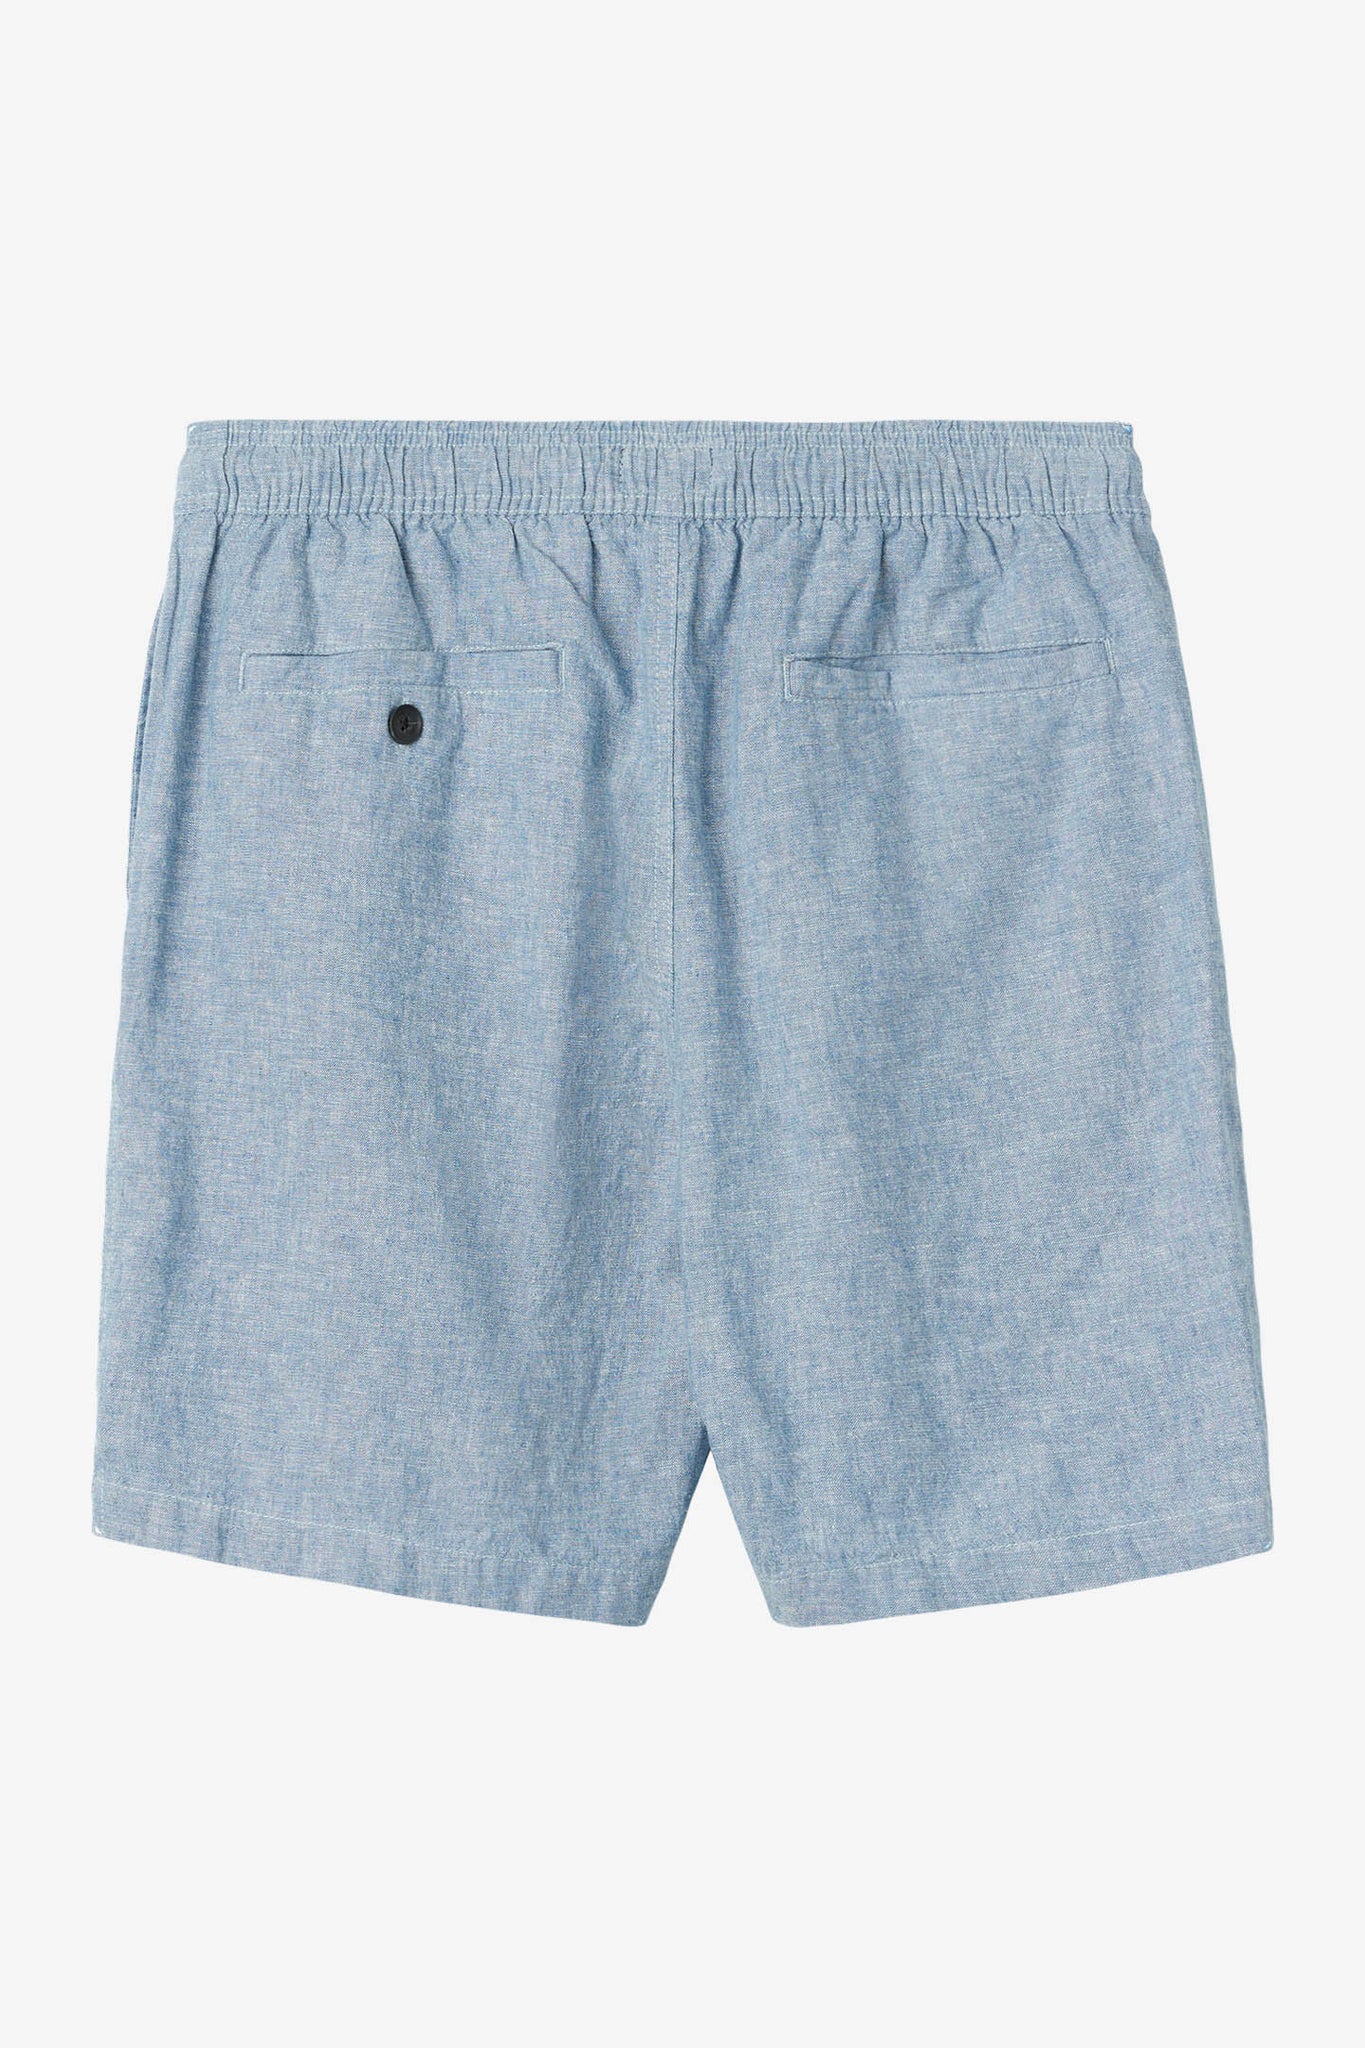 LOW KEY SOLID 18" SHORTS